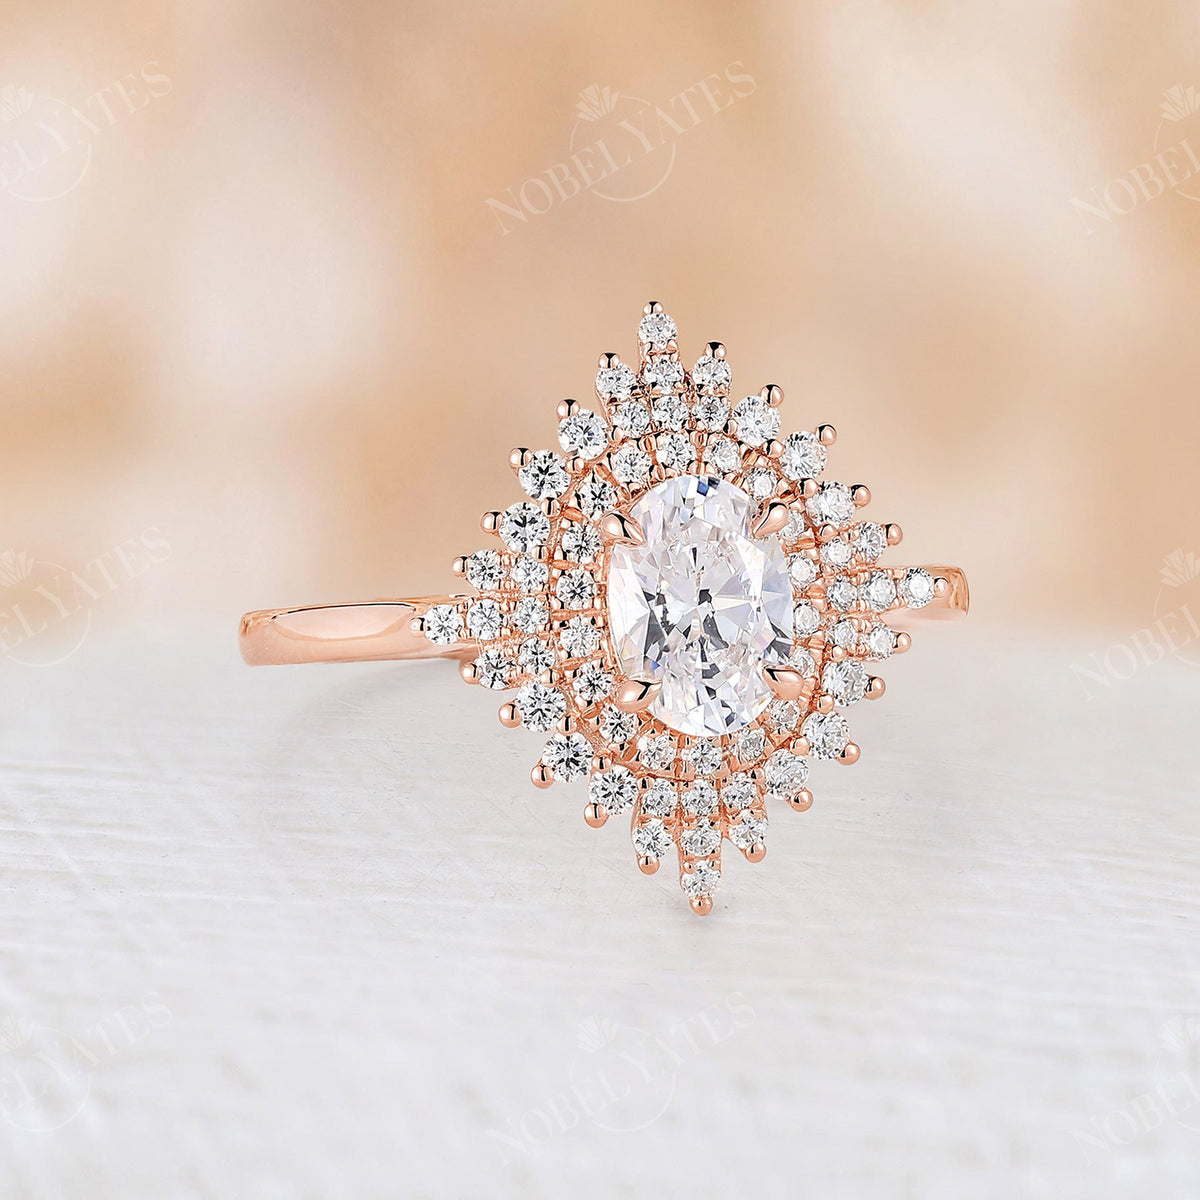 Vintage Oval Moissanite Engagement Ring Rose Gold Double Halo